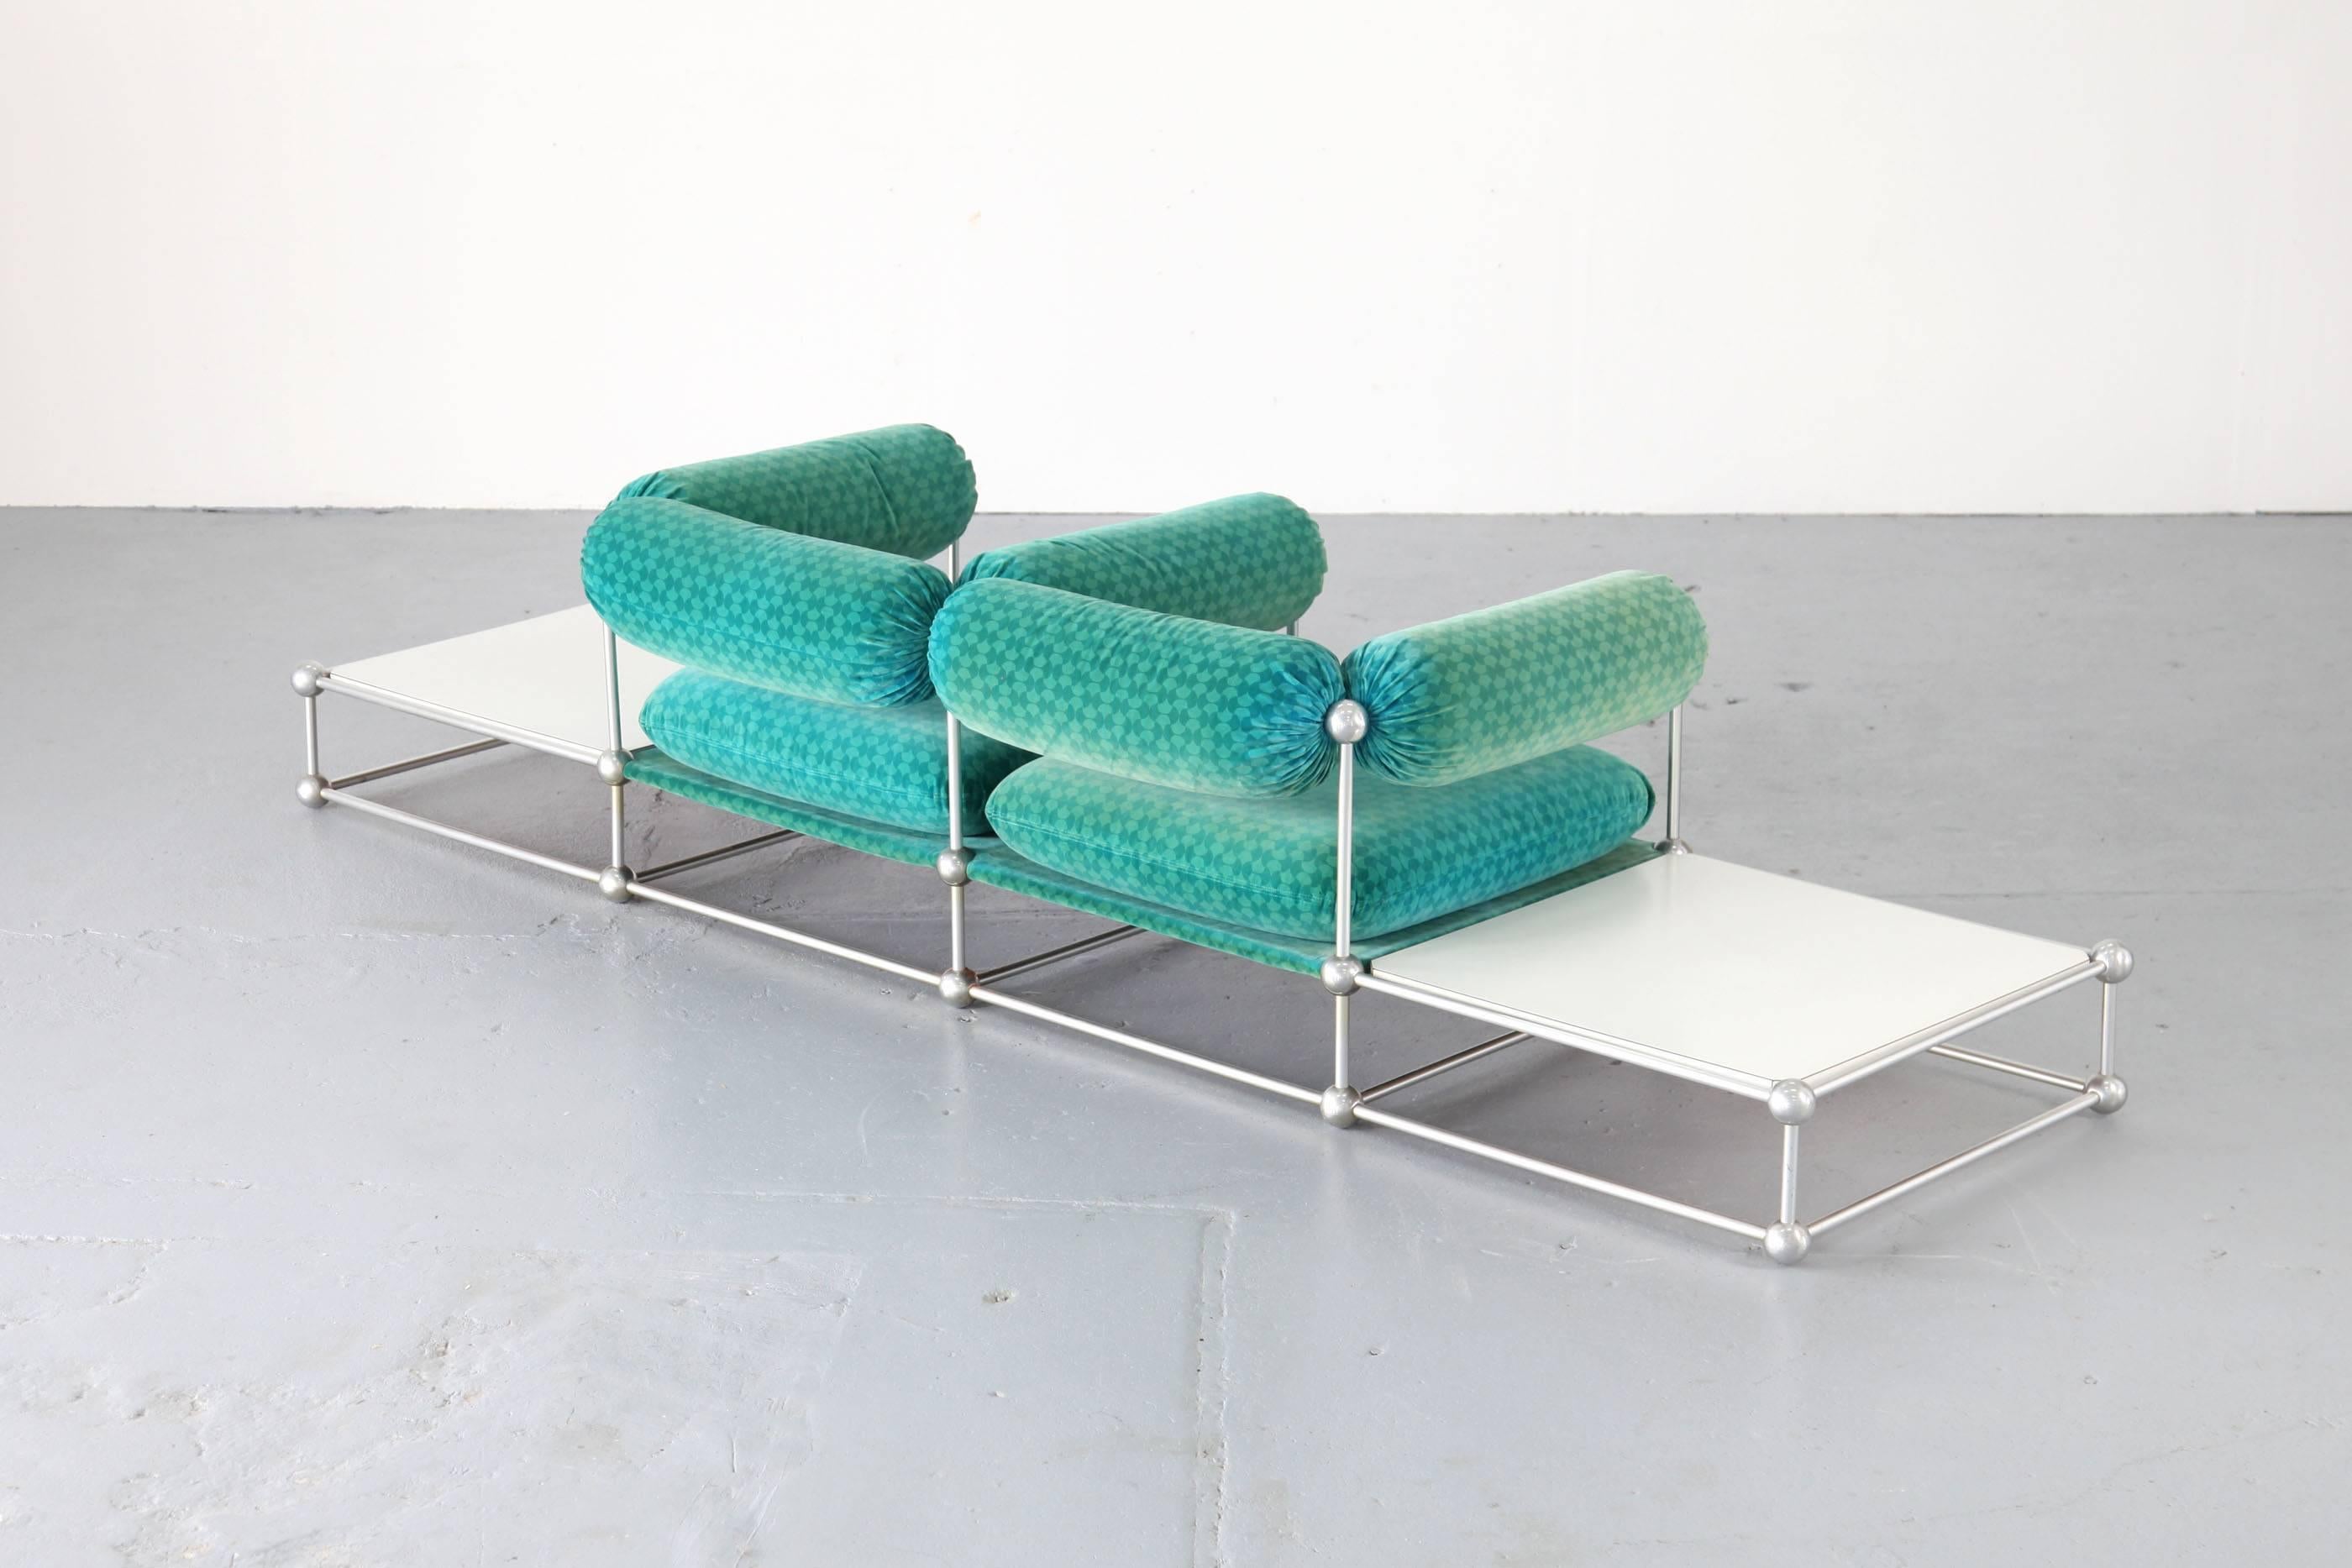 Two-Seat Sofa with Tables S420 Modular Seating by Verner Panton for Thonet 2